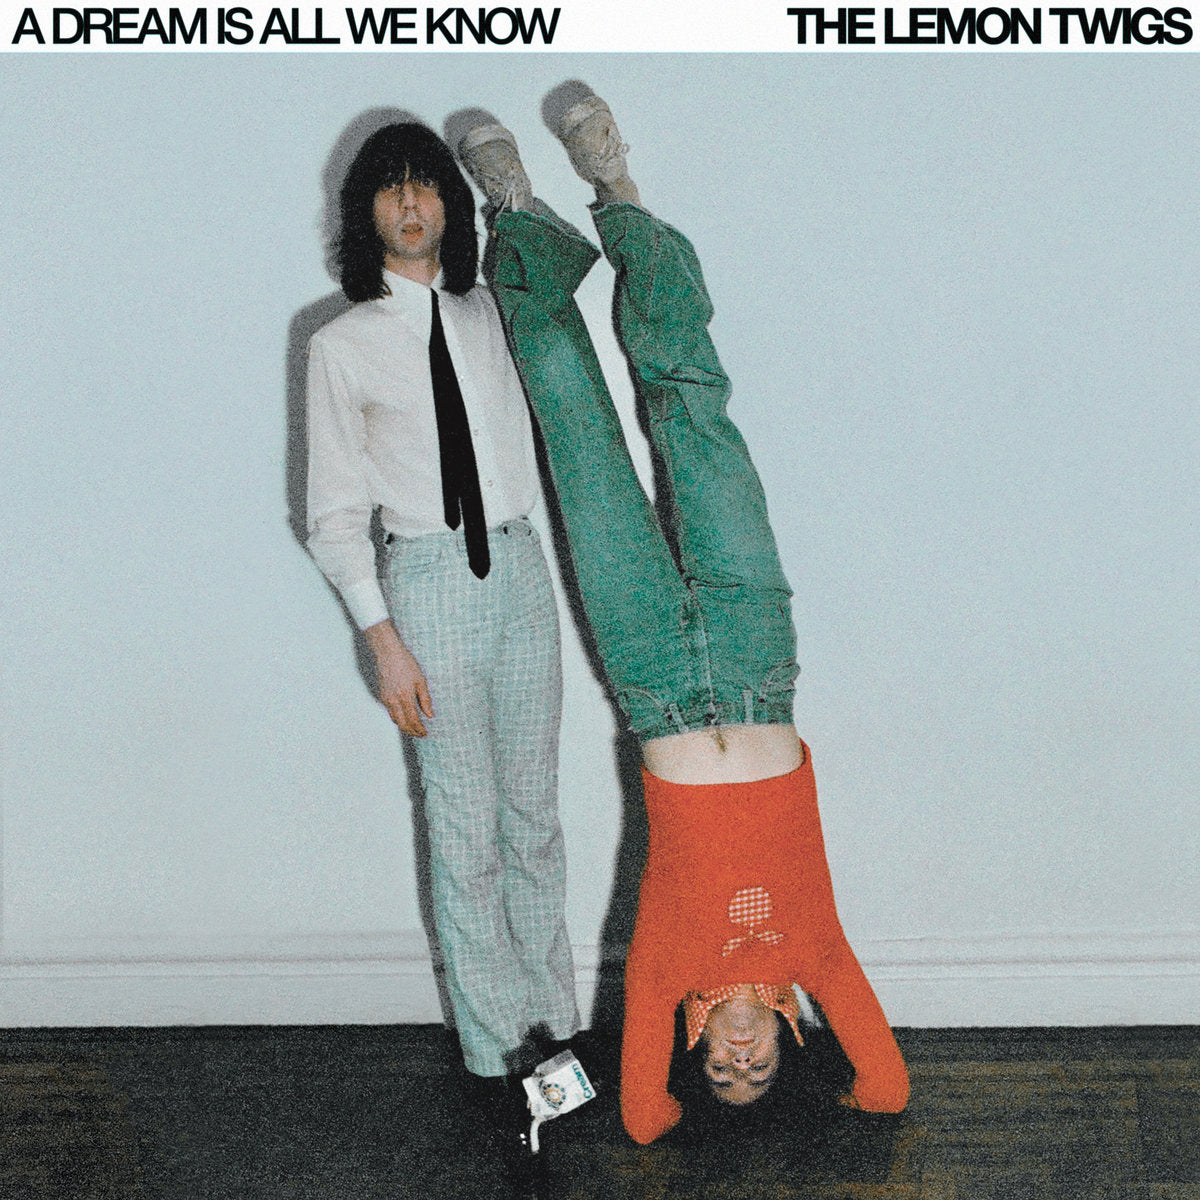 The LEMON TWIGS 'A DREAM IS ALL WE KNOW'